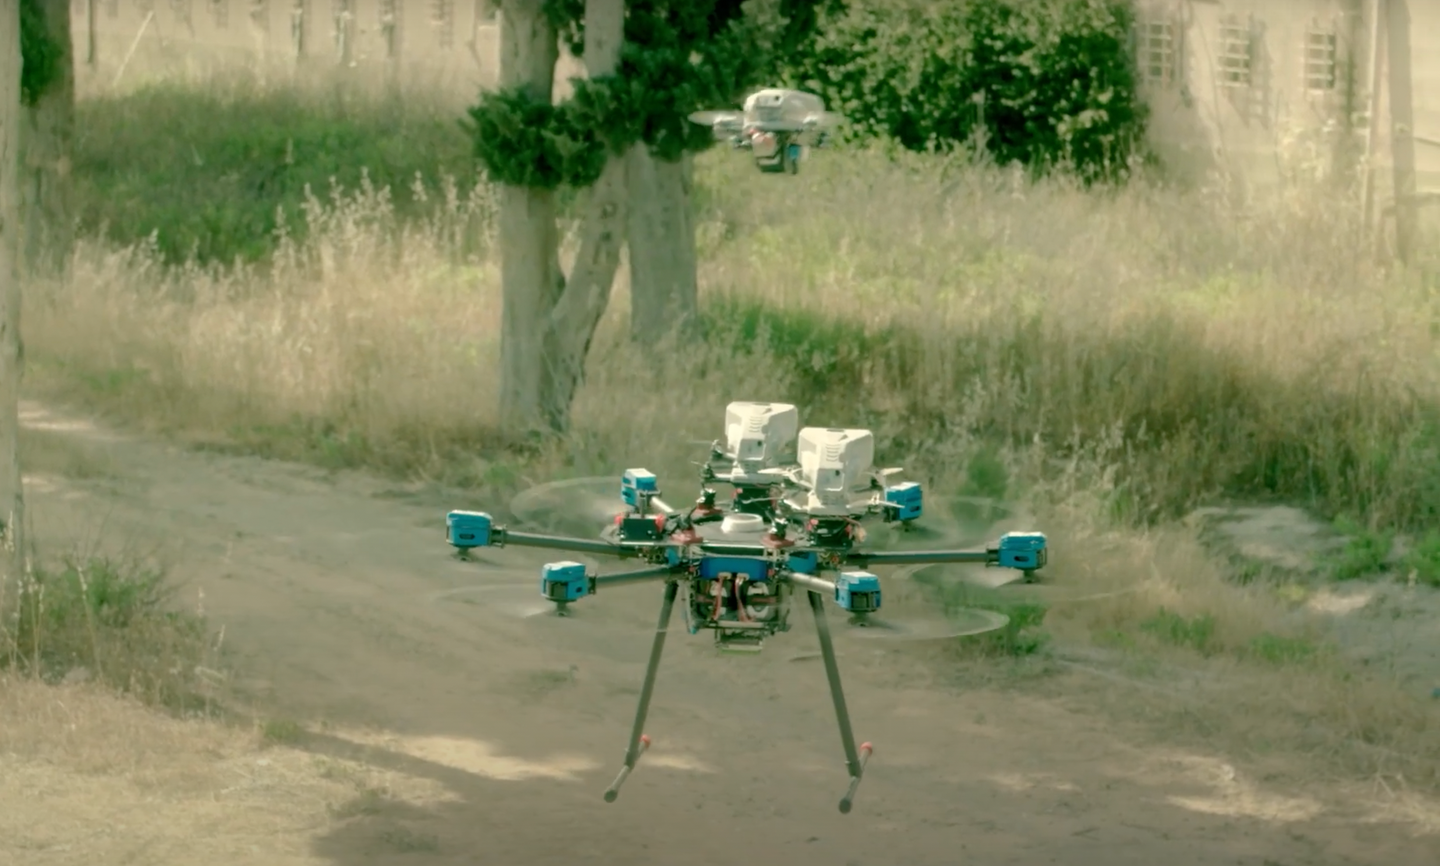 LANIUS launching from a hovering multicopter drone. <em>Credit: Elbit screengrab</em>